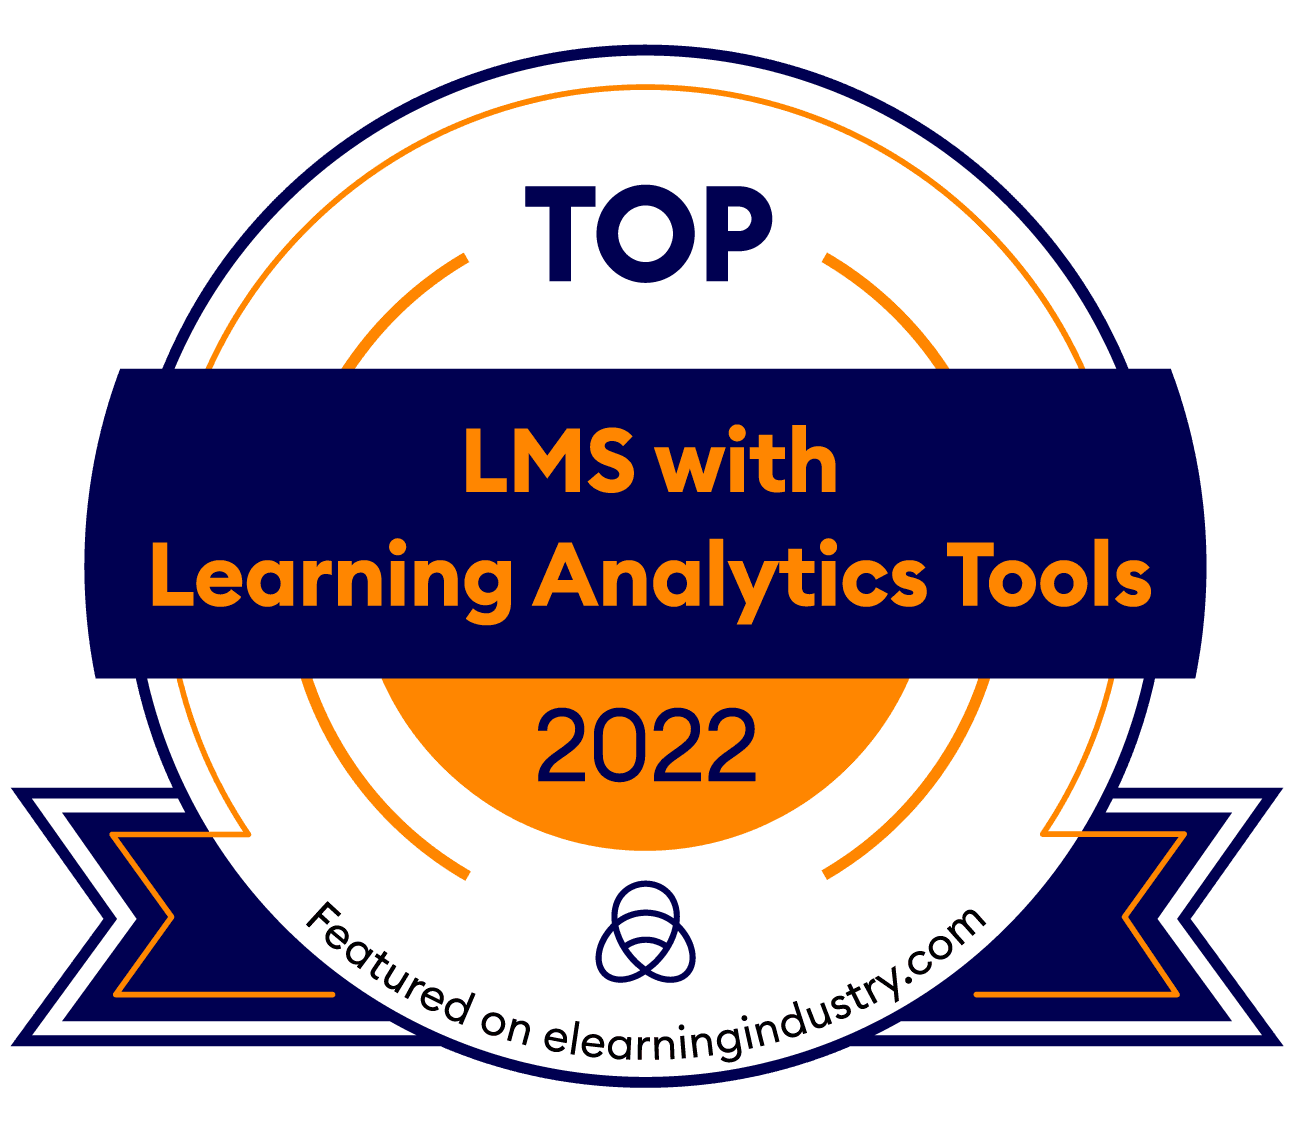 KREDO awarded Top LMS with Learning Analytics Tools 2022 by eLearning Industry